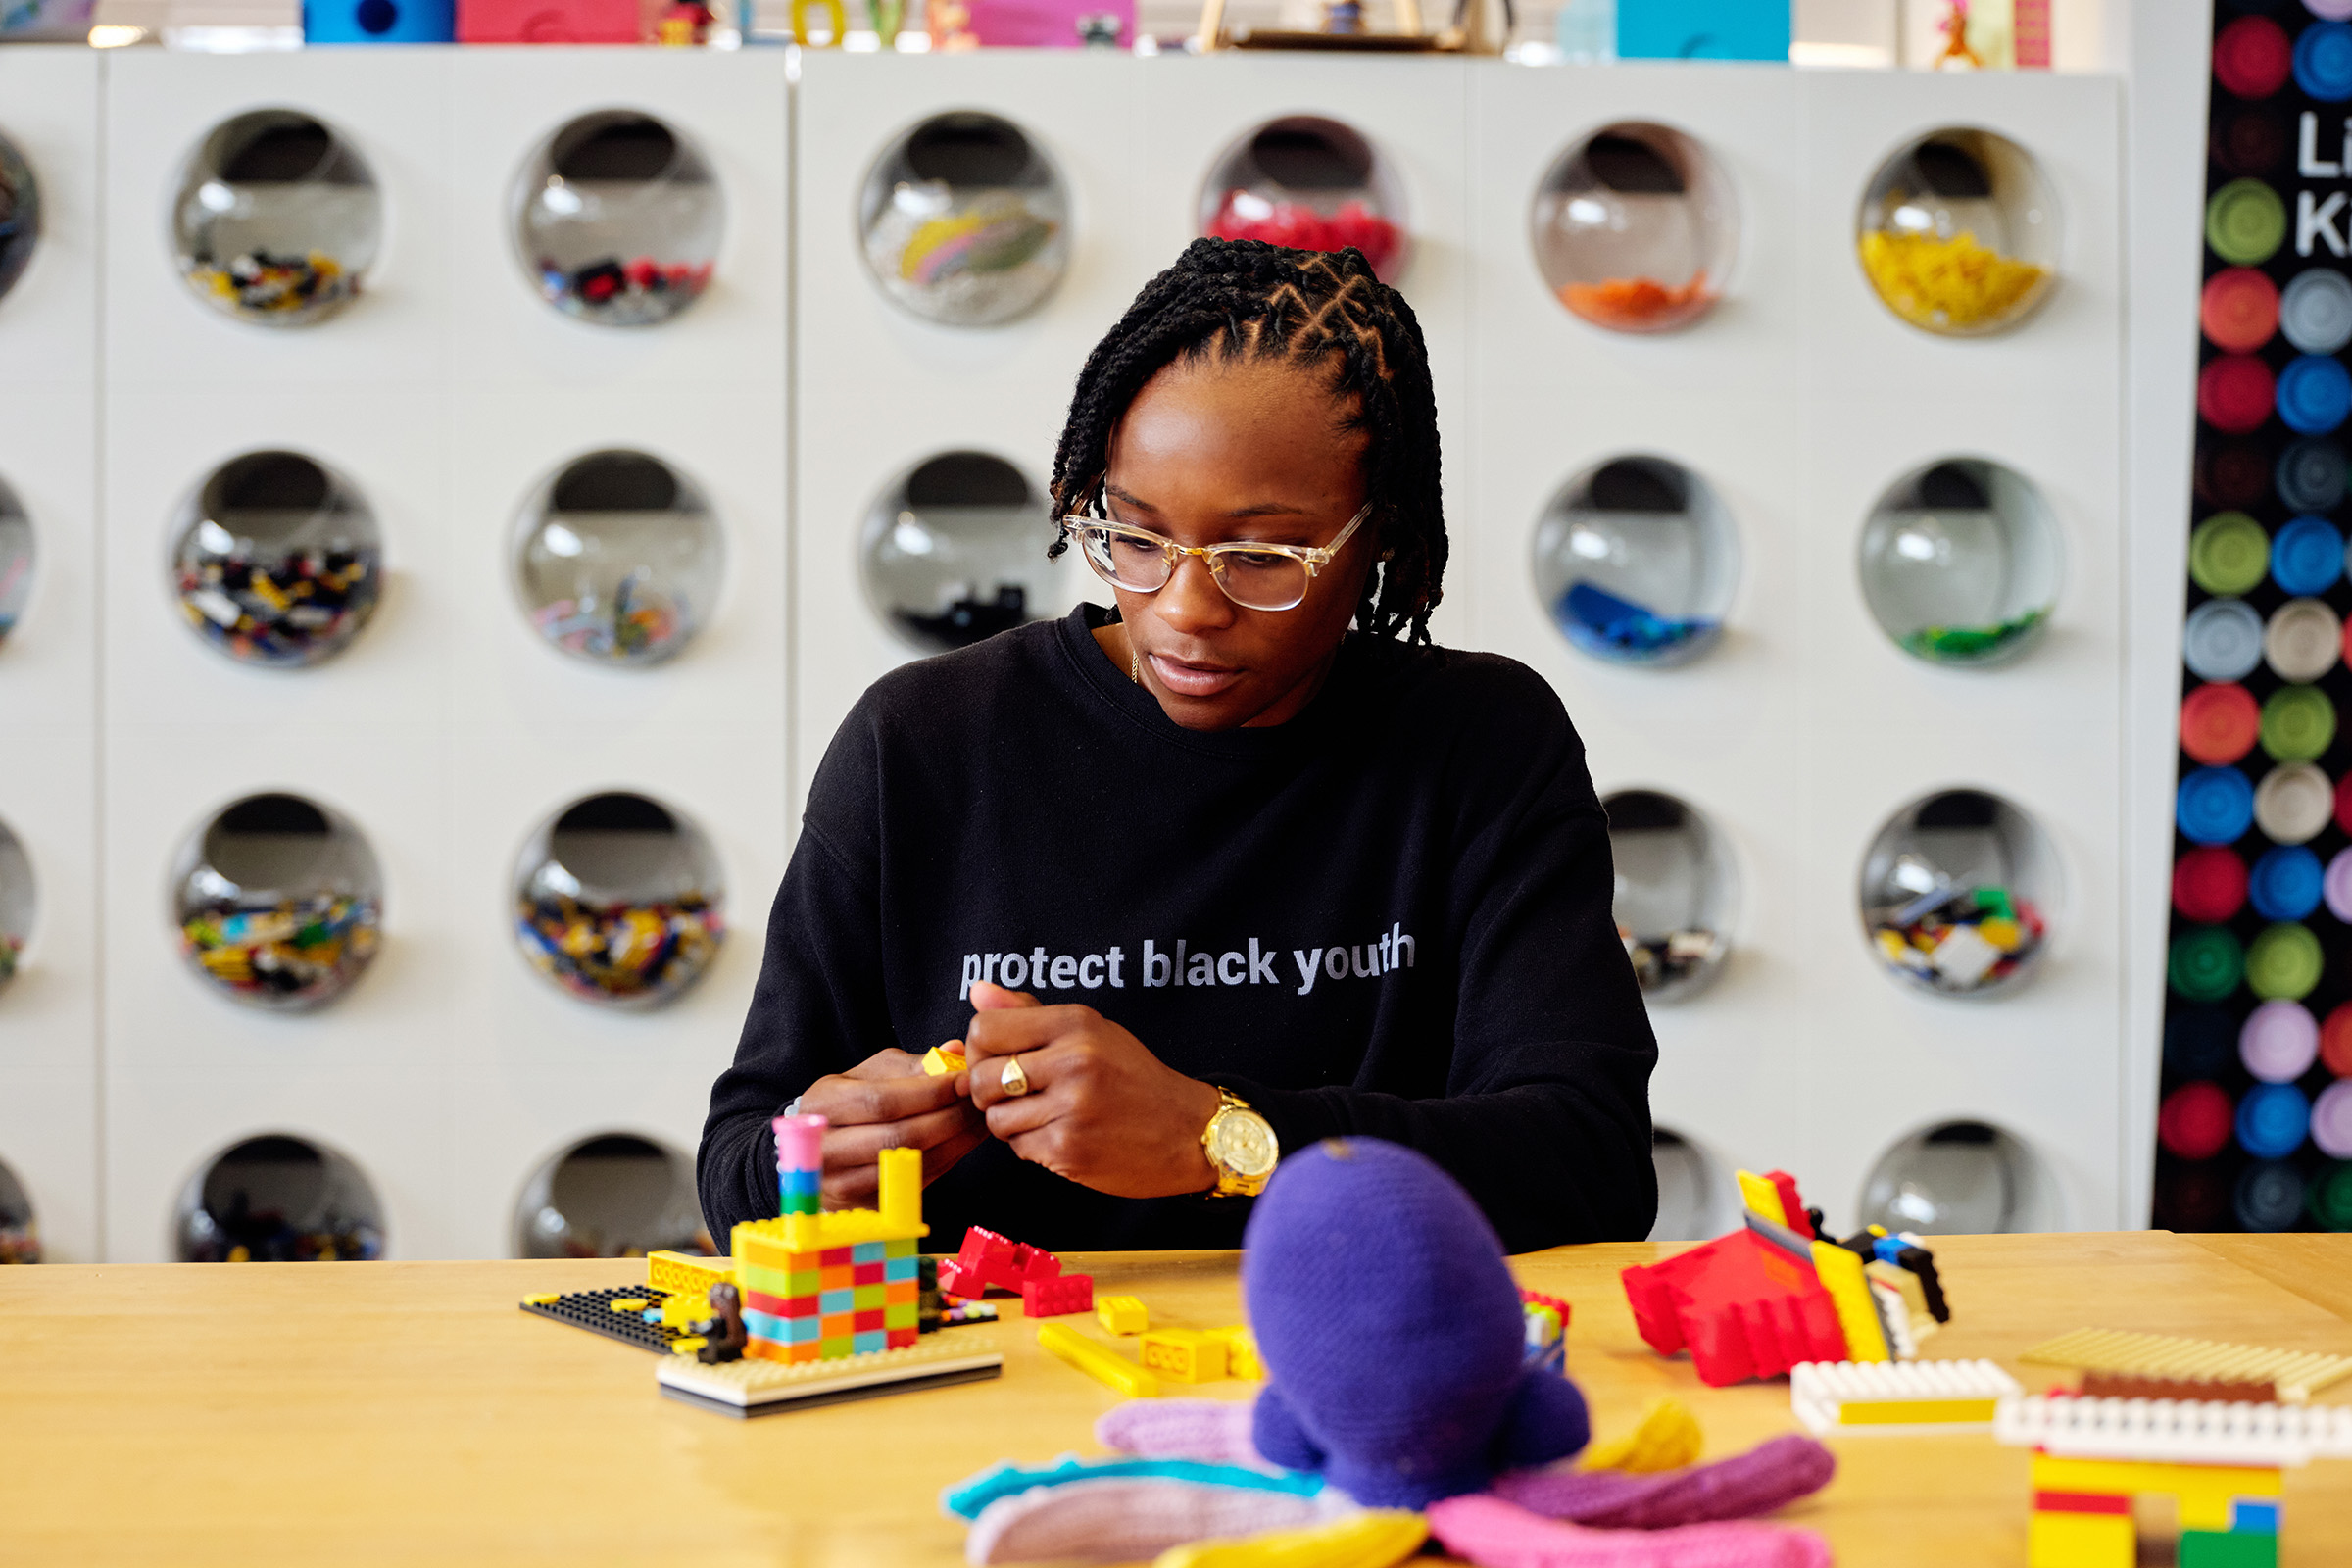 MIT graduate student Cecilé Sadler brings STEM and coding activities developed by MIT’s Lifelong Kindergarten group to the Cambridge-based grassroots community organization blackyard, and investigates what makes a positive learning environment for the students.